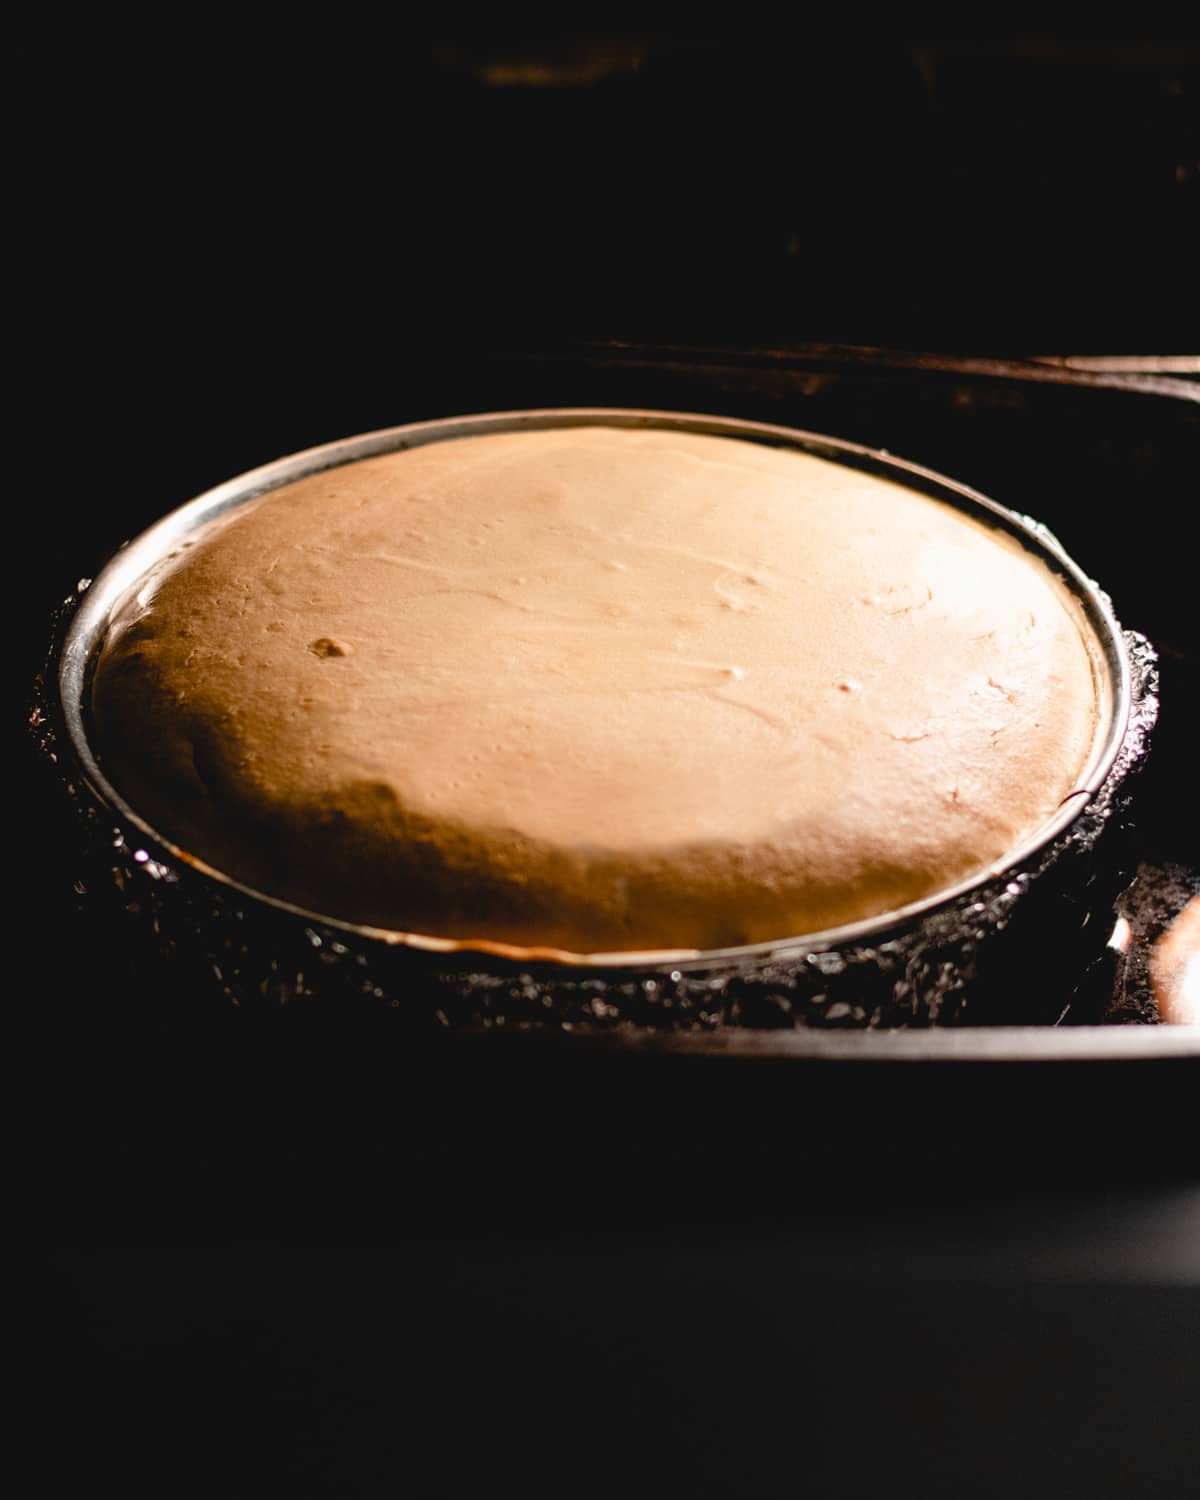 Cheesecake is baking in the oven.